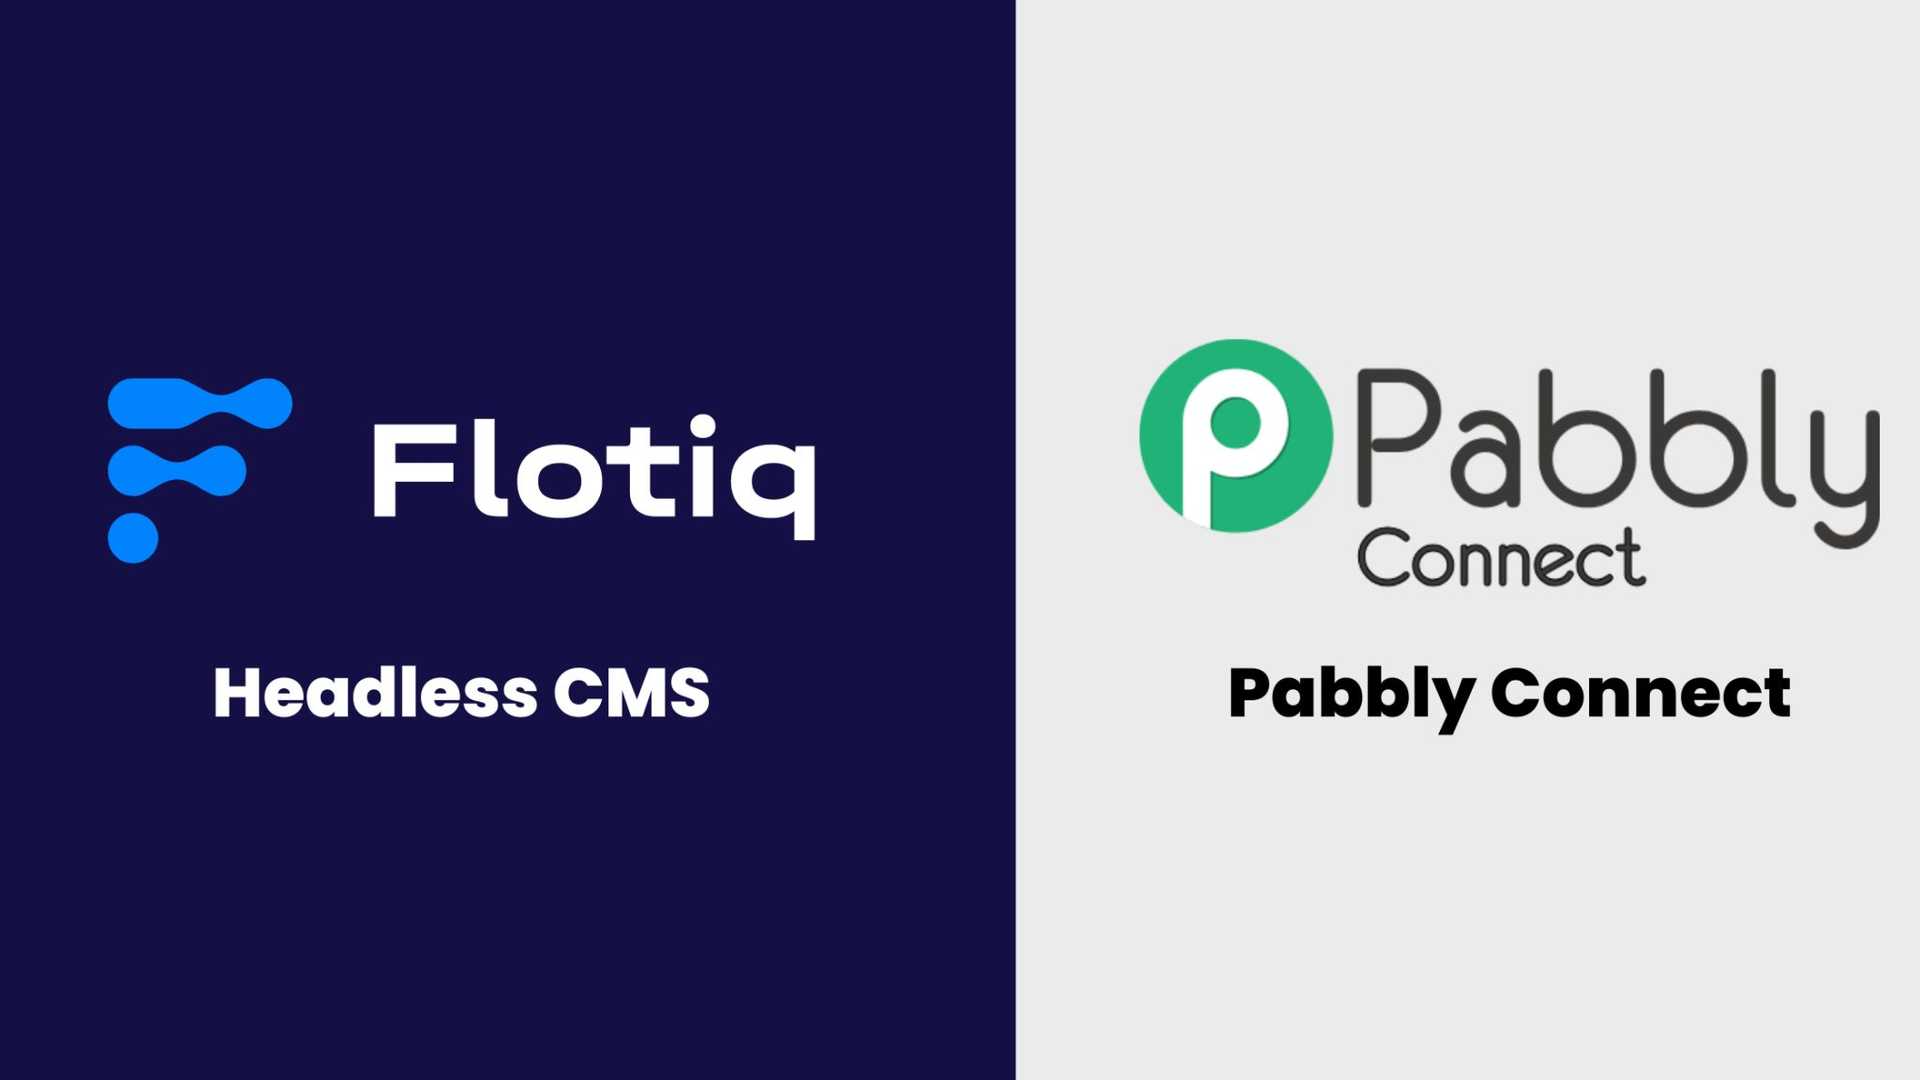 Automate your event invitations with Flotiq and Pabbly